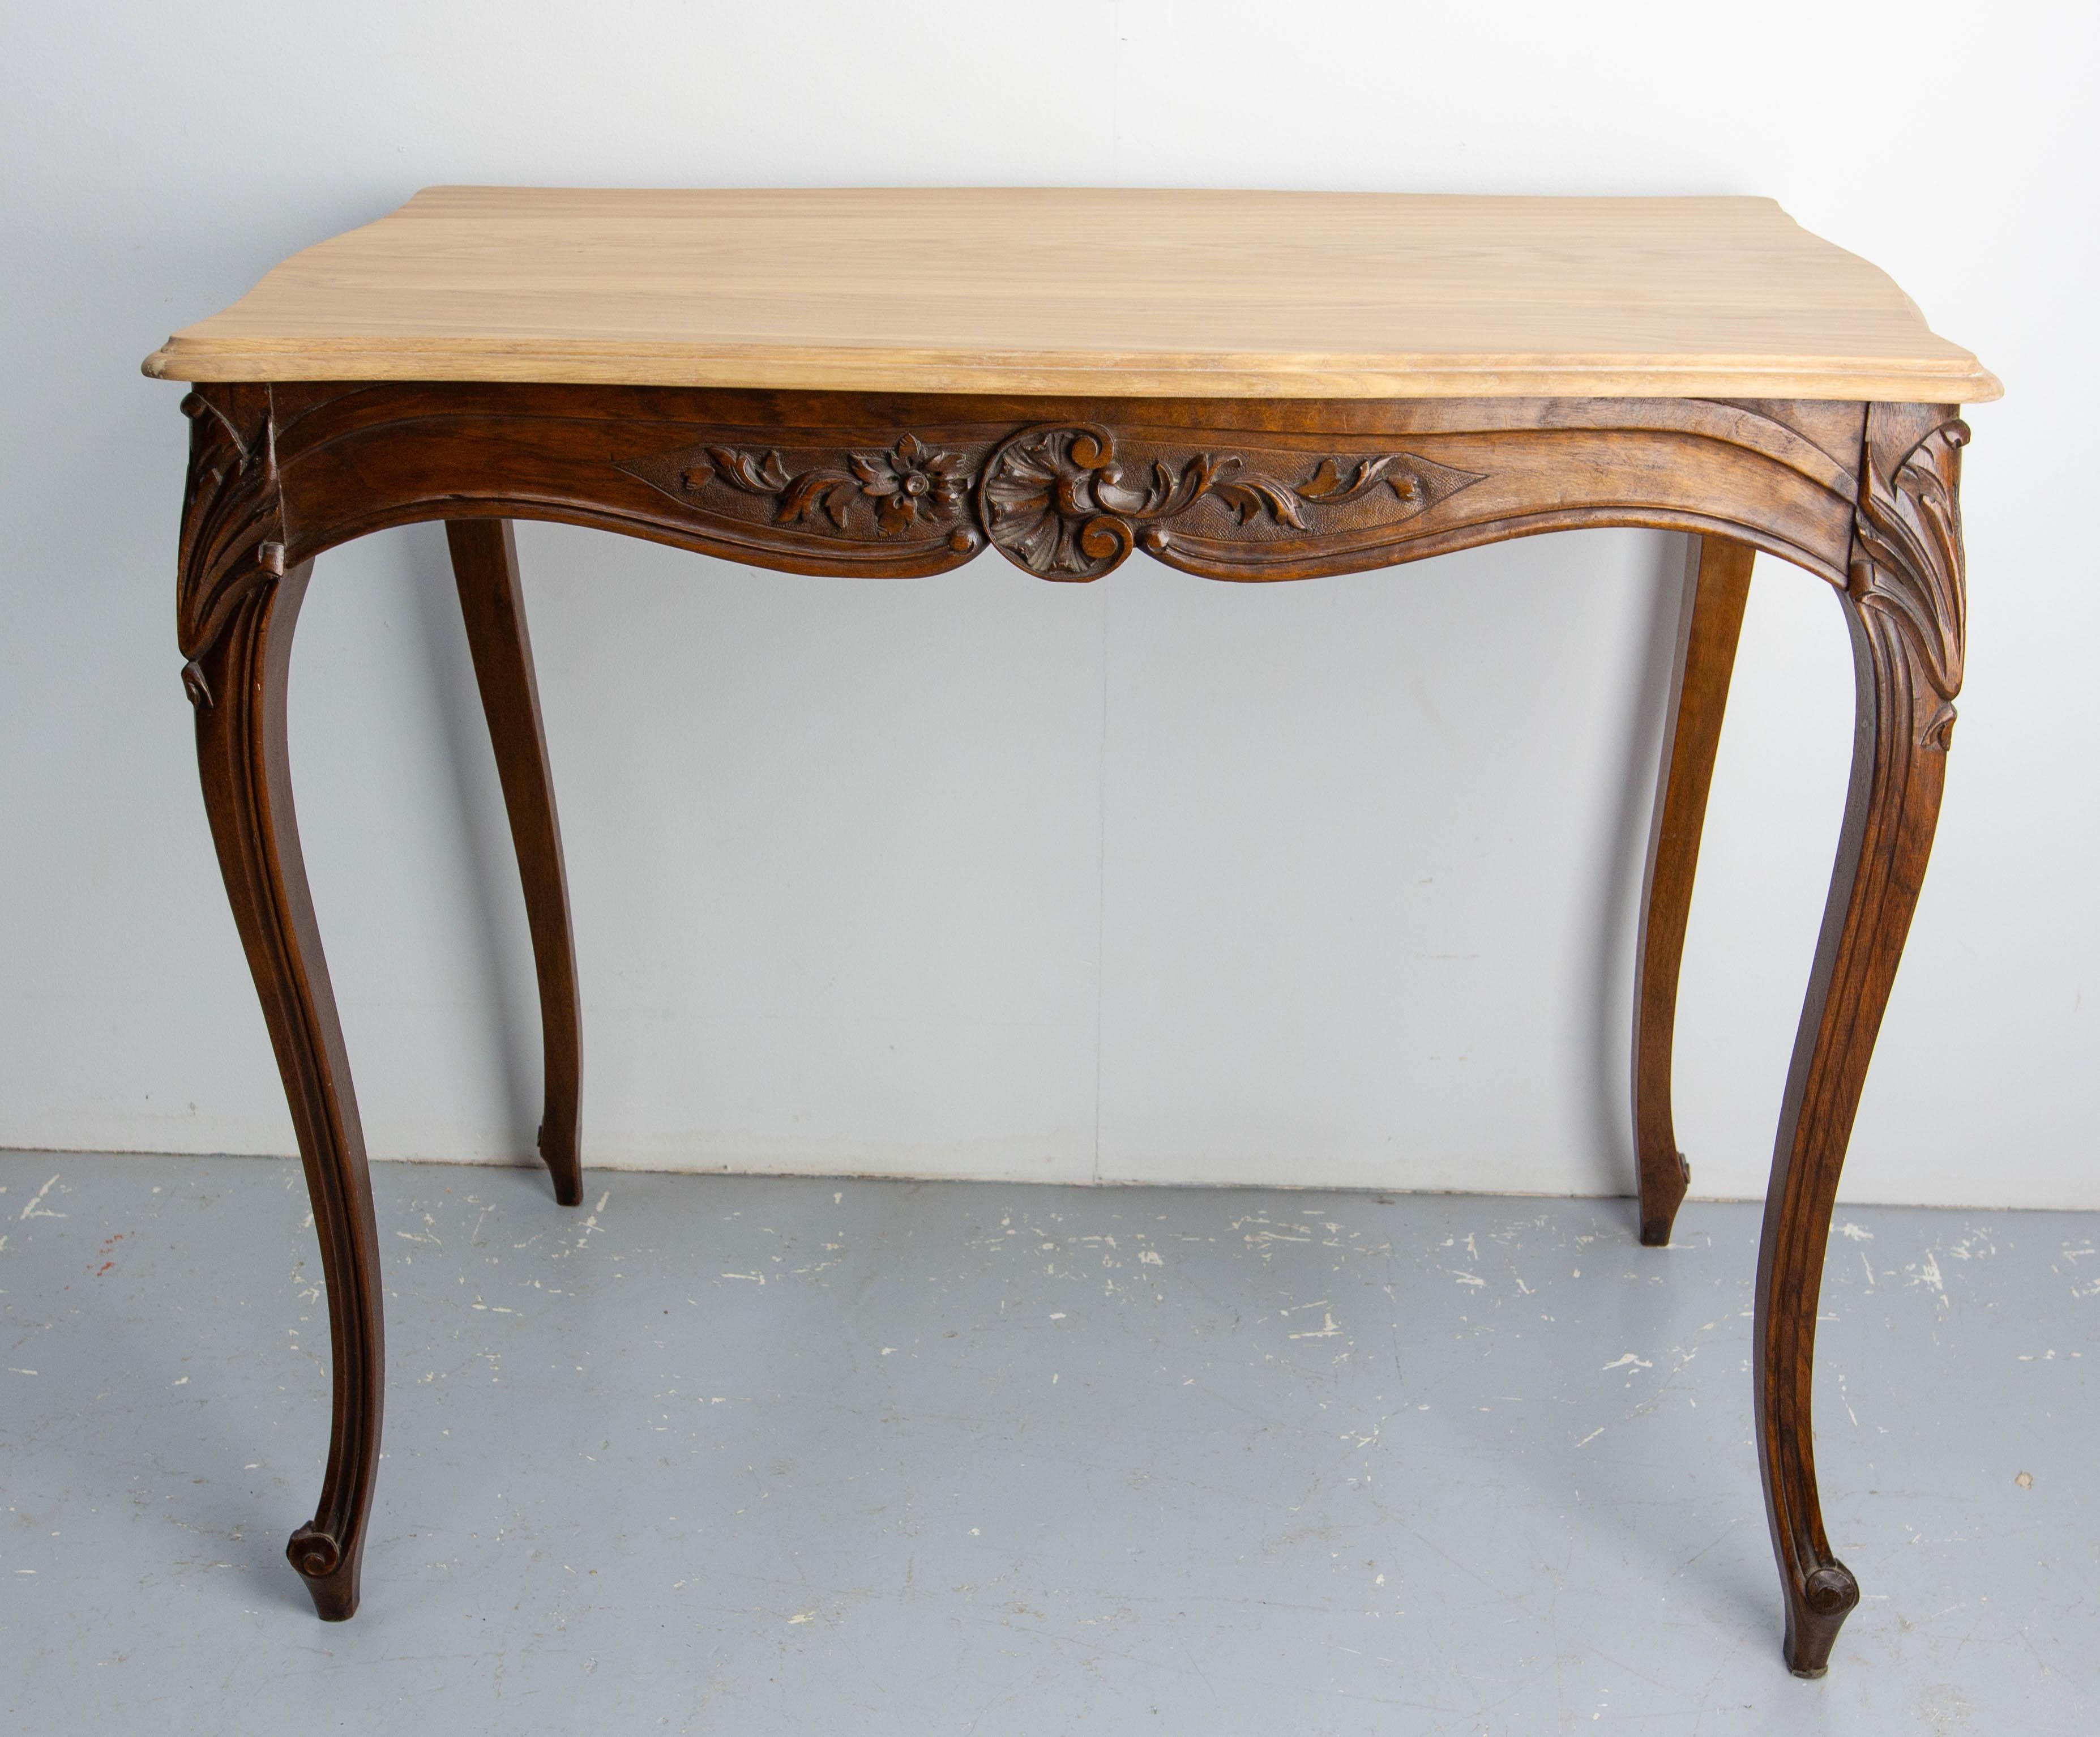 Antique Walnut side table, made circa 1900 in the Louis 15 style.
To add a drawer while keeping the aesthetic appearance of the table, a large drawer is hidden behind the sculpture of the front belt of the table.
The top table was redone with the